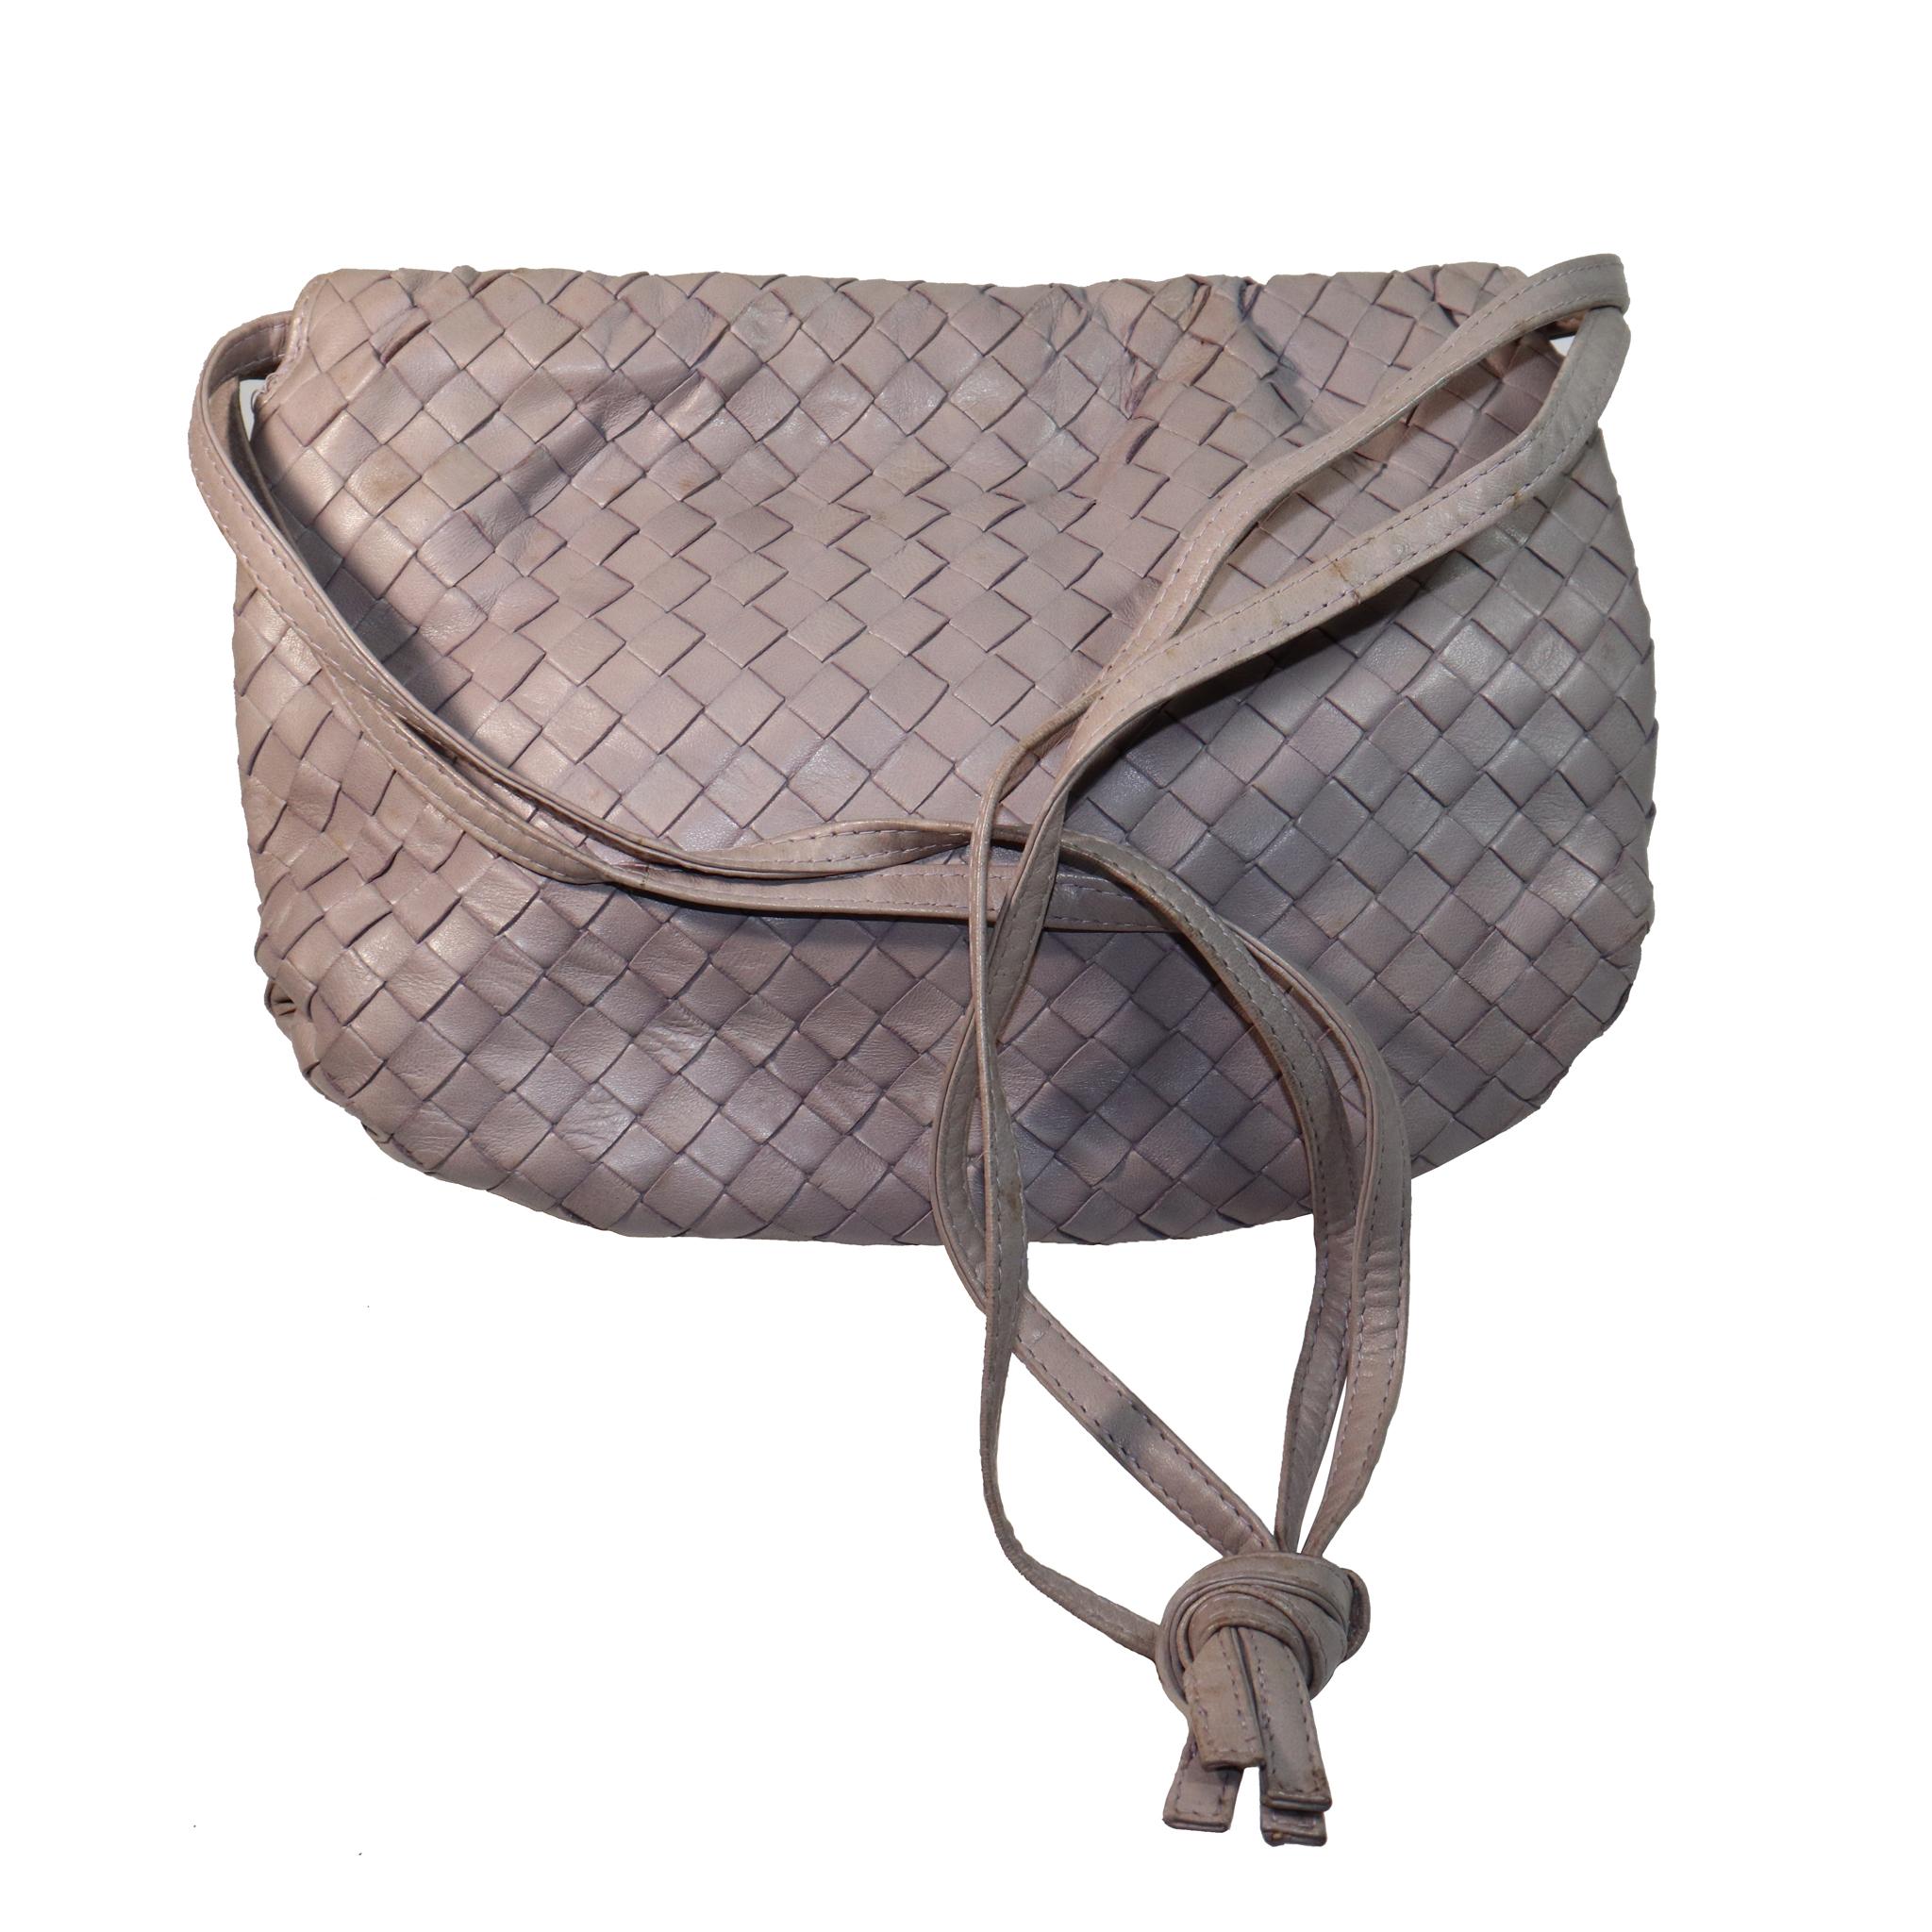 Bottega Veneta Lavender Classic Woven Handbang W/ Strap 

Measurements:

Height - 9.5 inches 
Width - 14.5 inches 
Height with Strap - 28.5 inches 